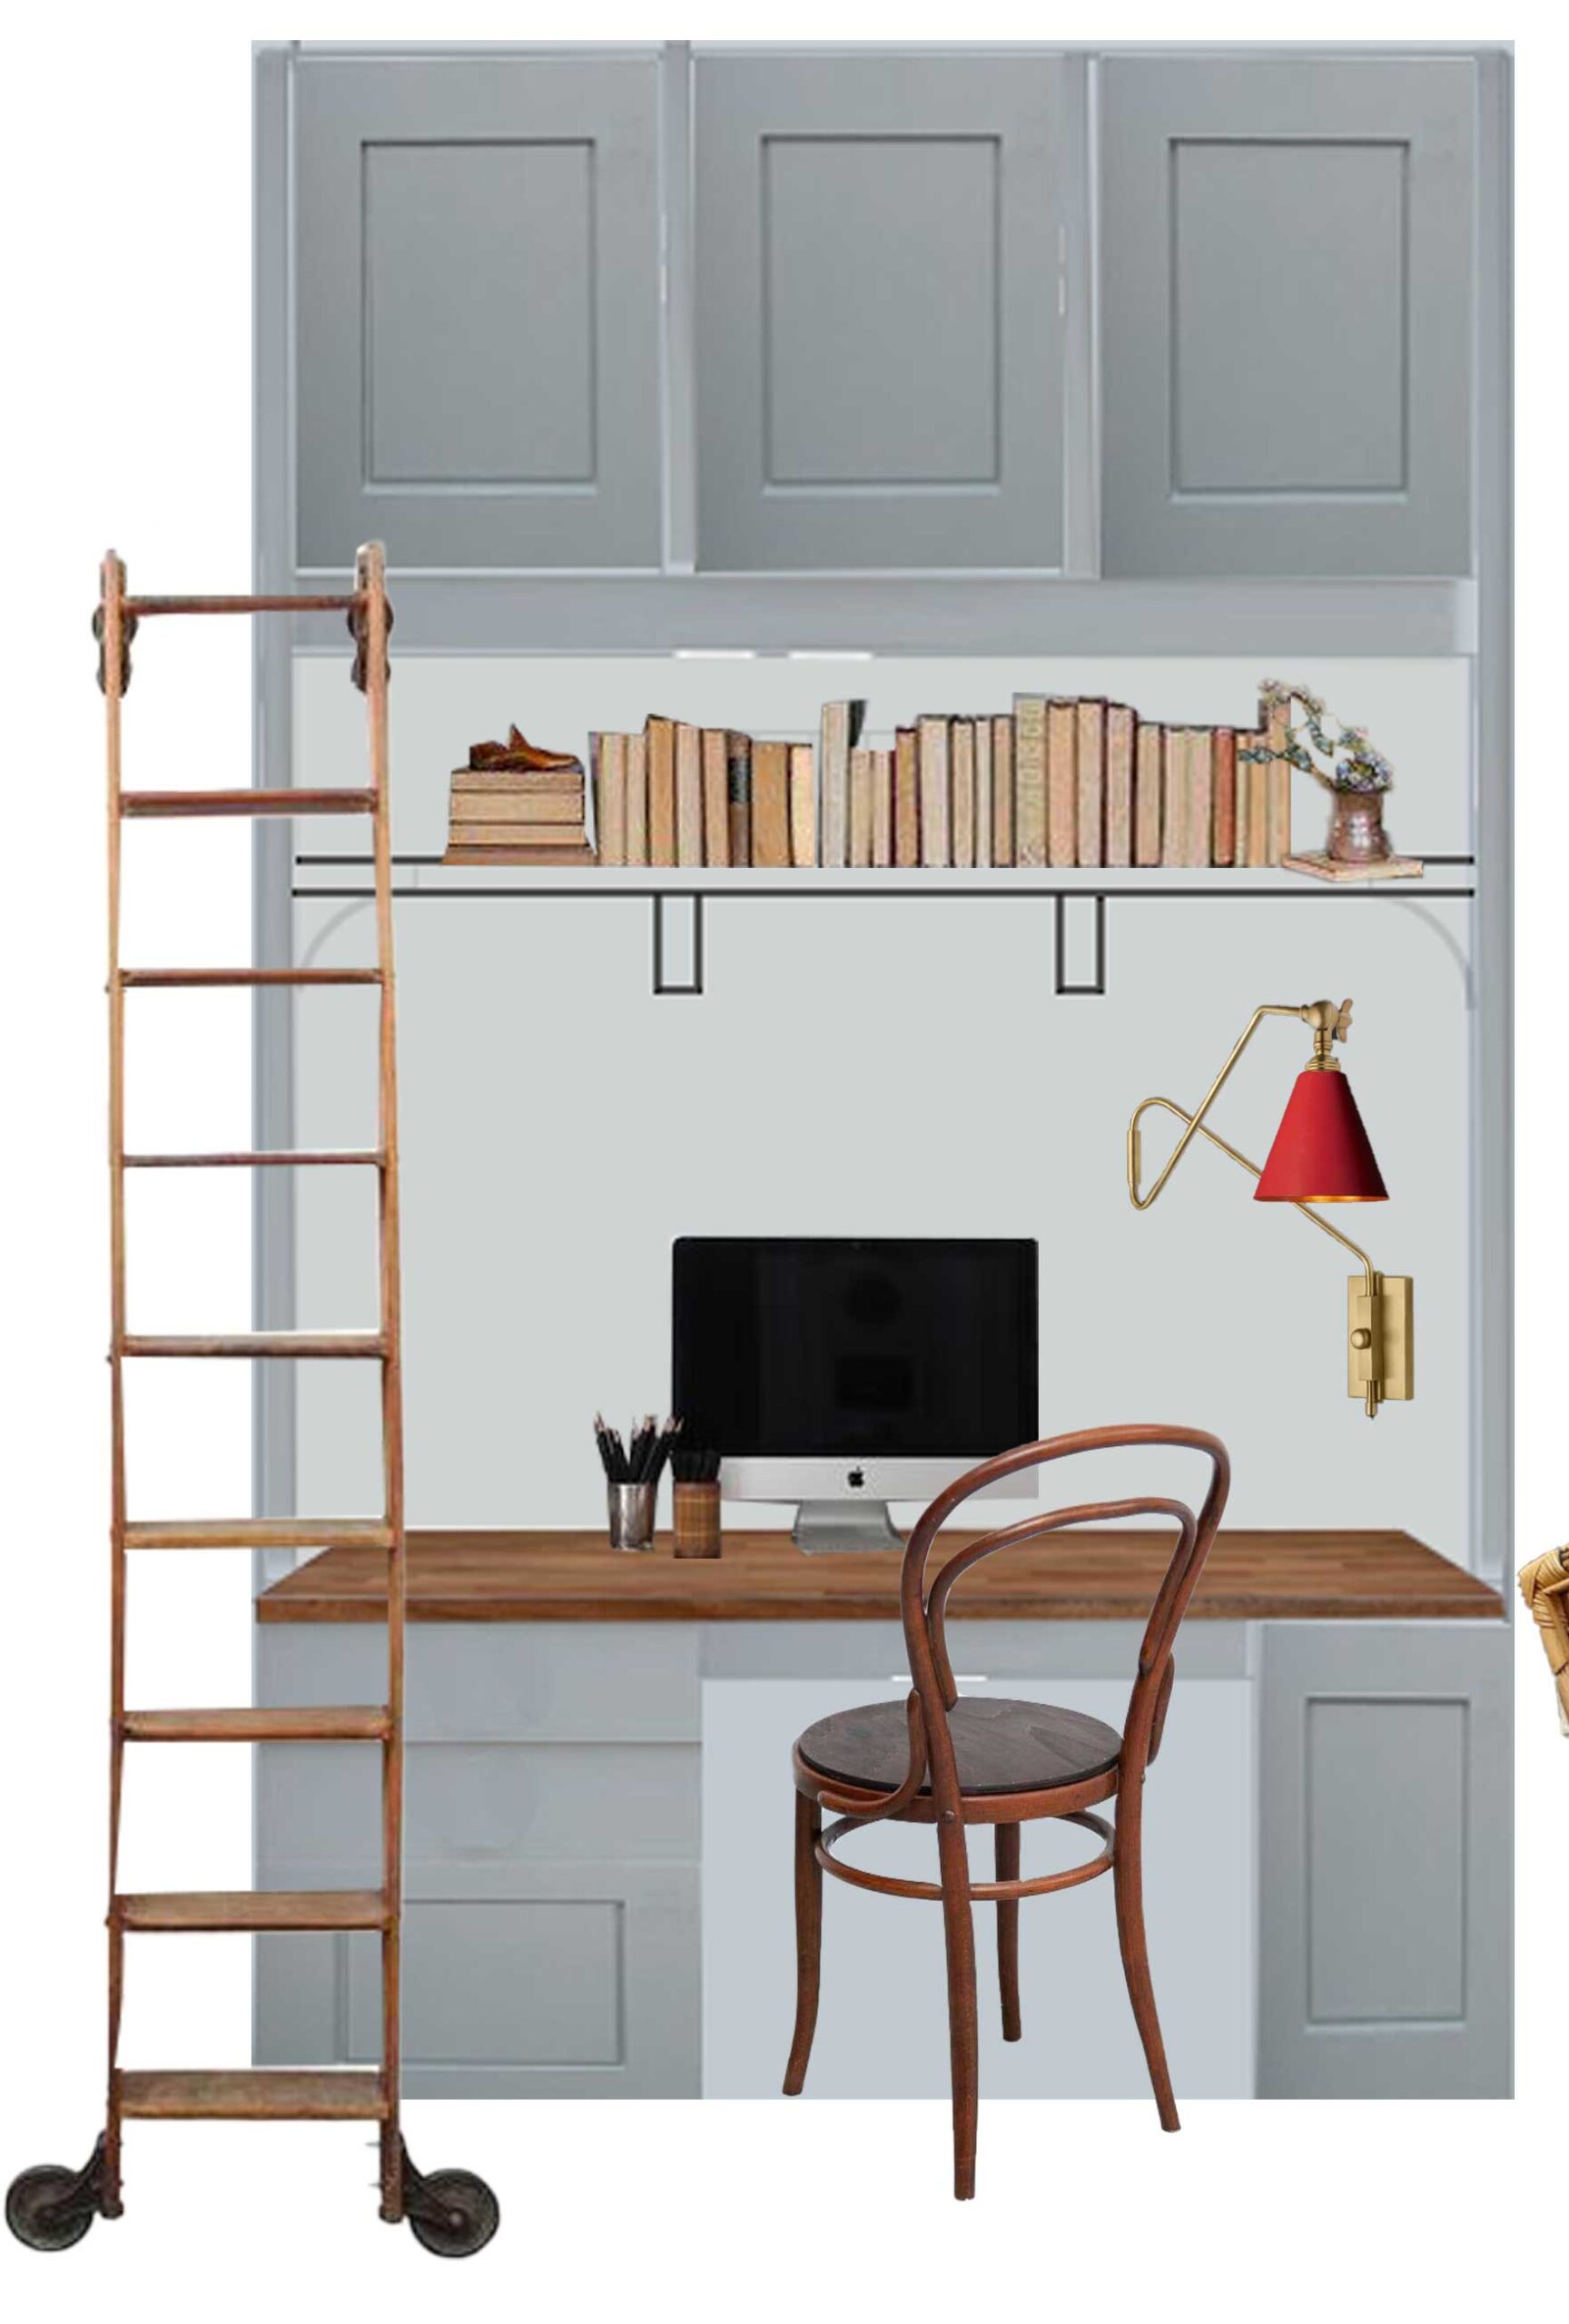 Home office nook moodboard with blue cabinets, wood desk top, library ladder.